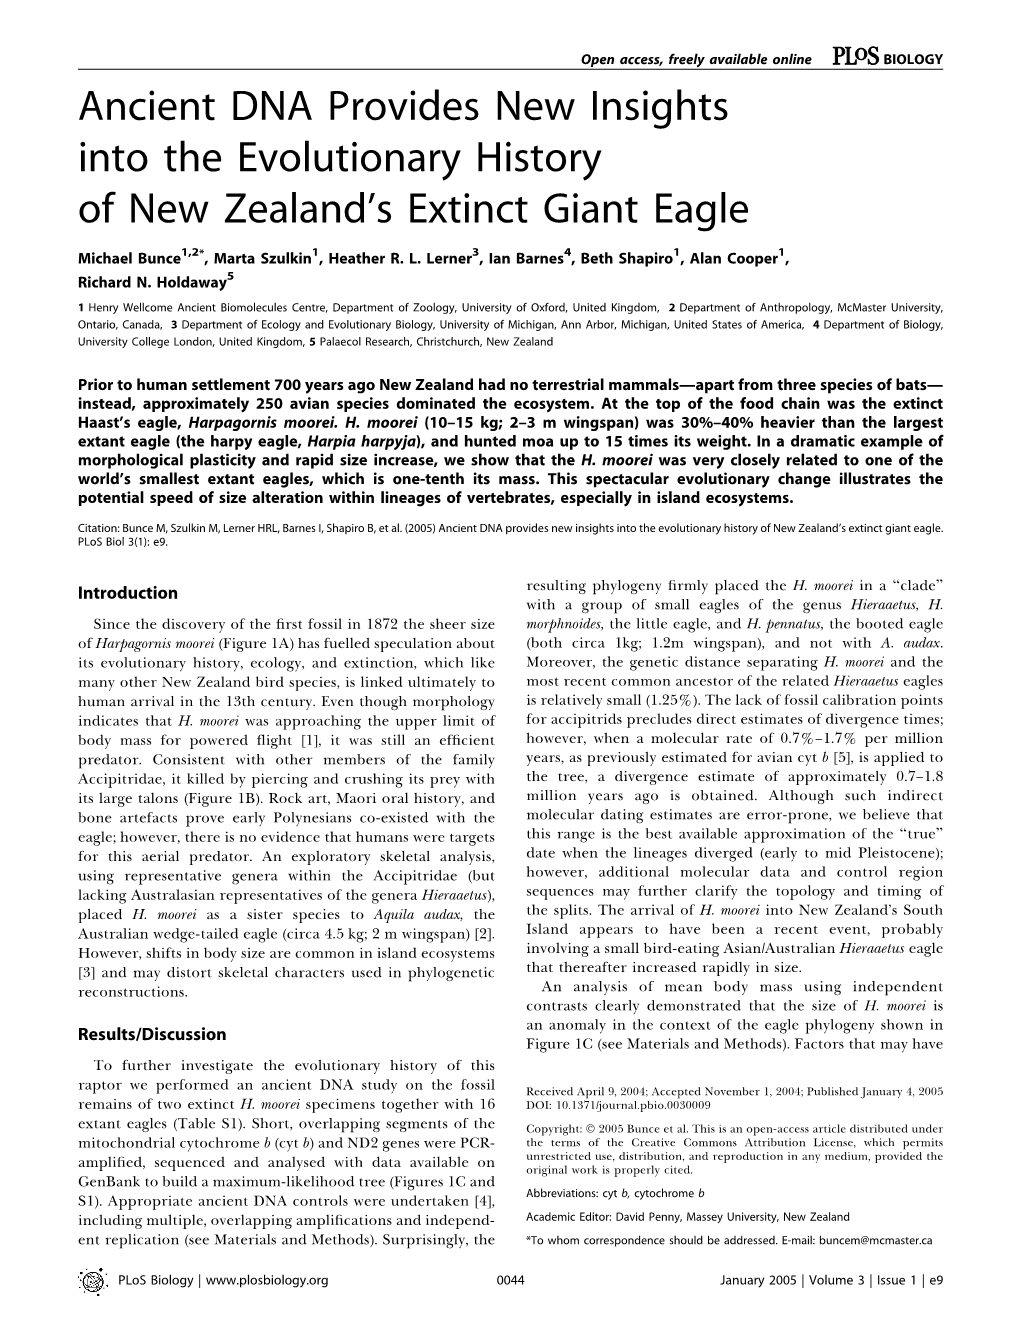 Ancient DNA Provides New Insights Into the Evolutionary History of New Zealand’S Extinct Giant Eagle